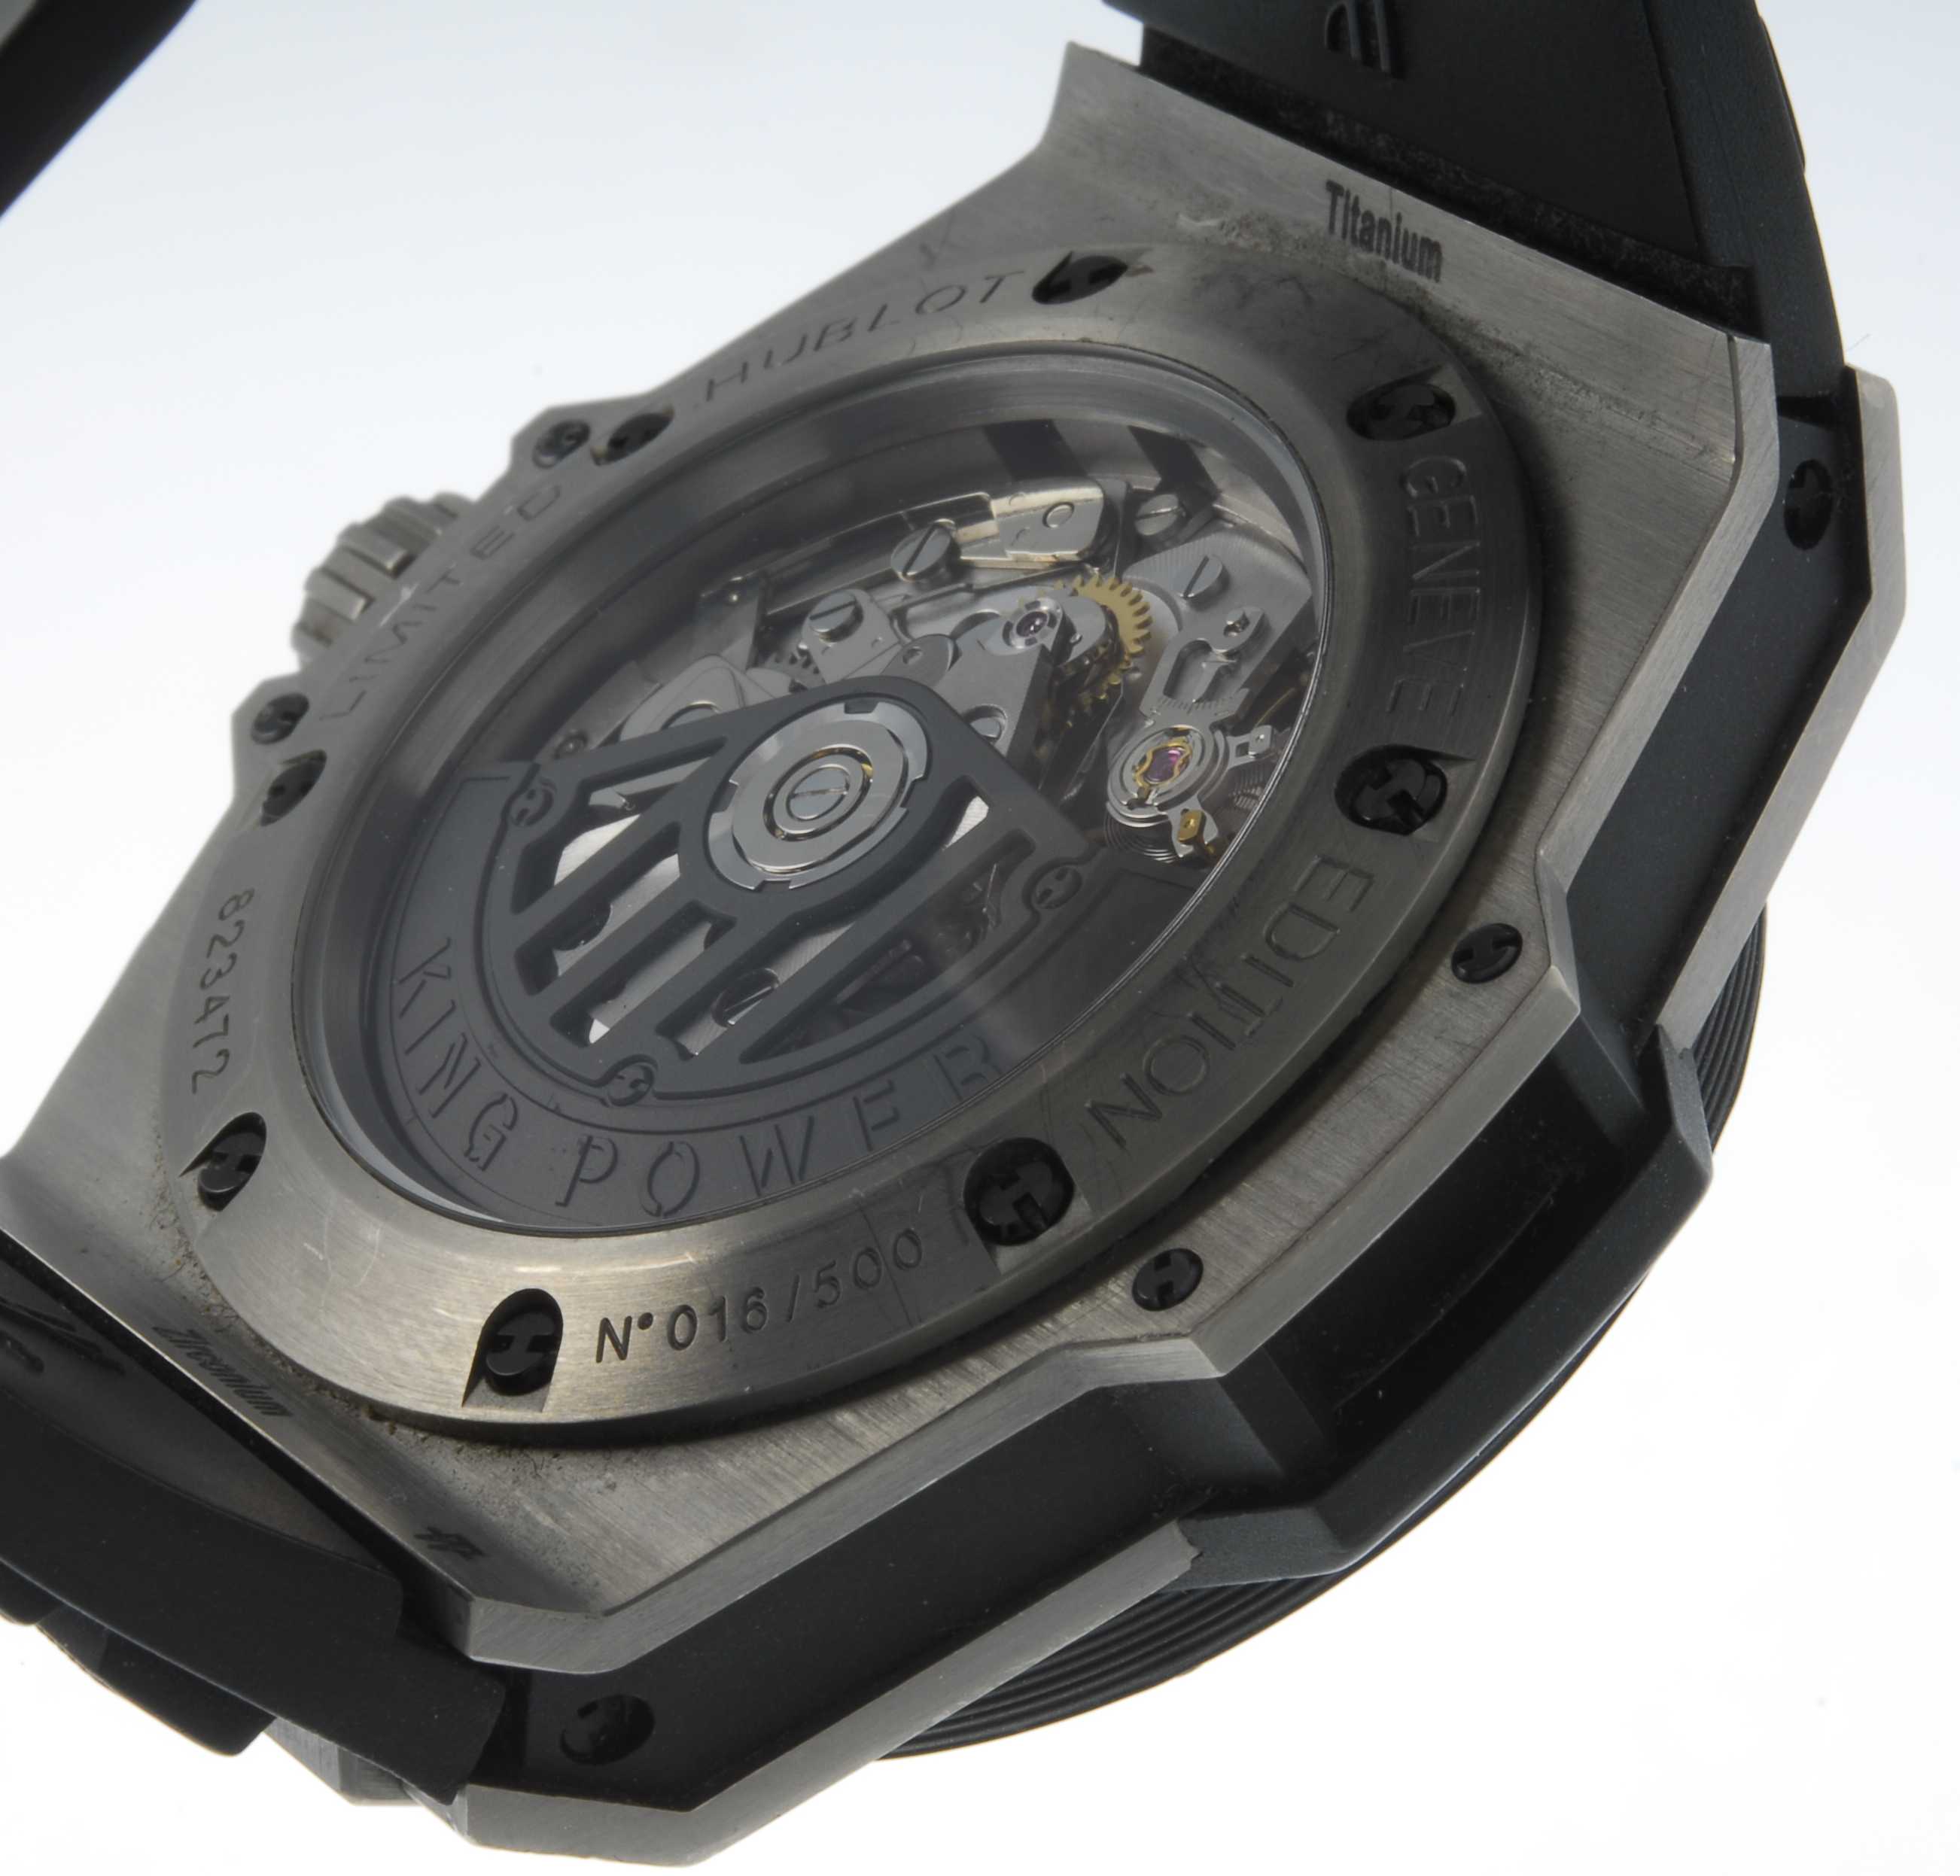 HUBLOT - a limited edition gentleman's King Power chronograph wrist watch. Number 16 of 500. - Image 3 of 4